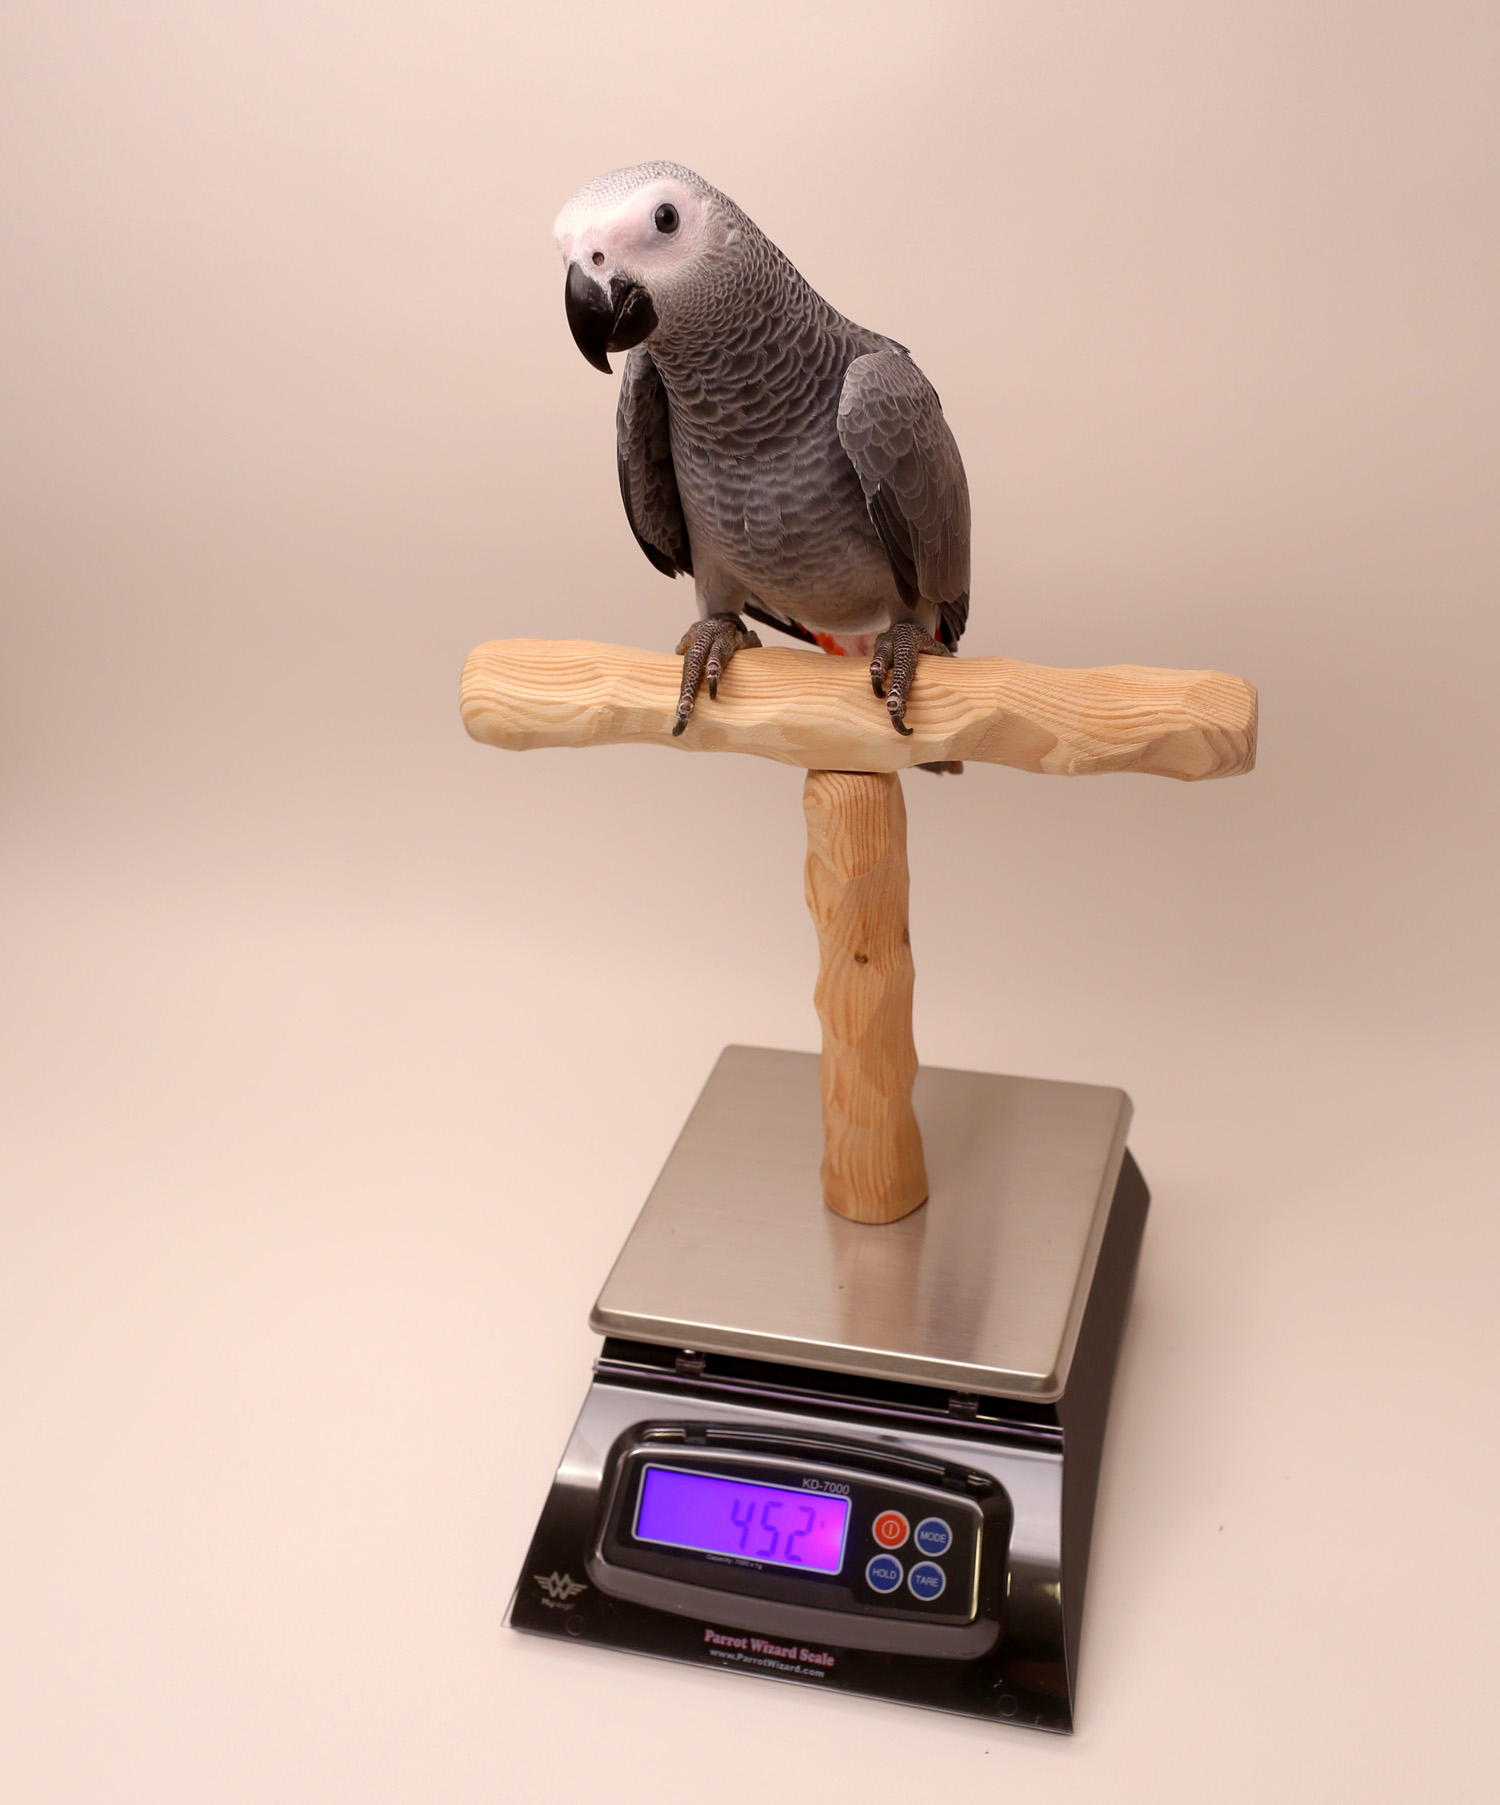 Digital Bird Scale with Perch, Bird Scale Grams, Max 44lbs, Capacity with